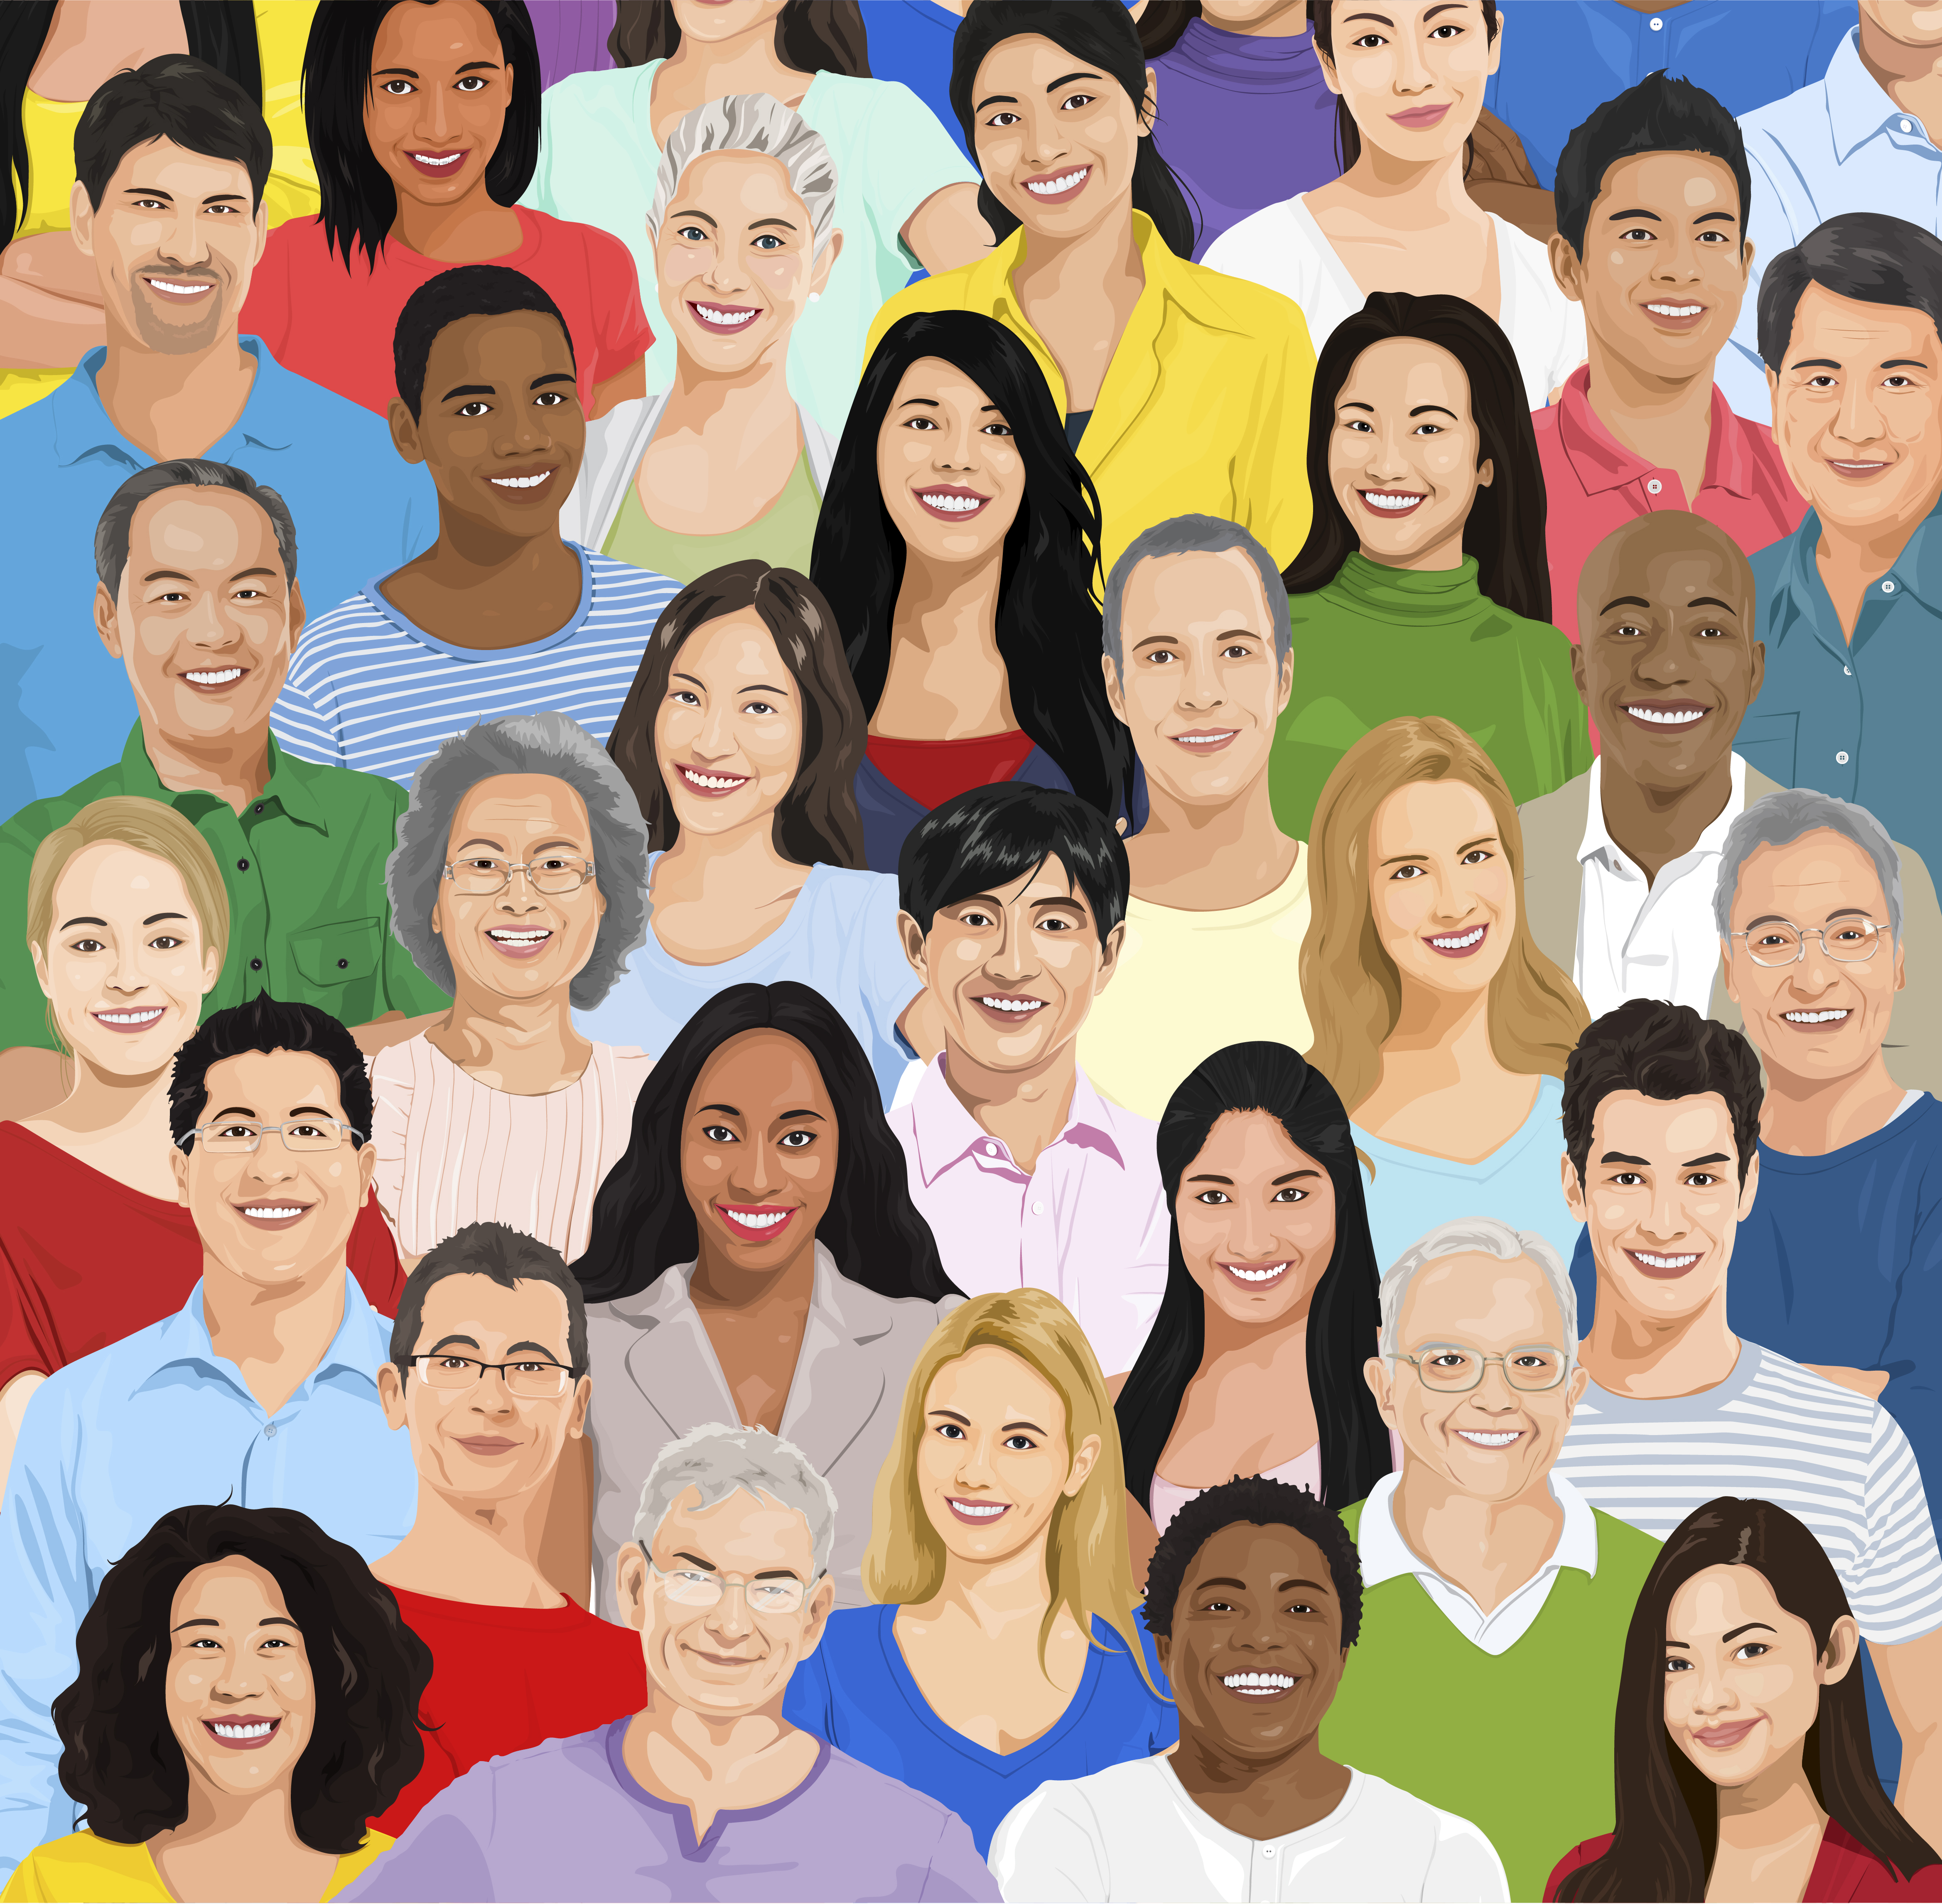 Illustration of diverse people - Download Free Vectors, Clipart